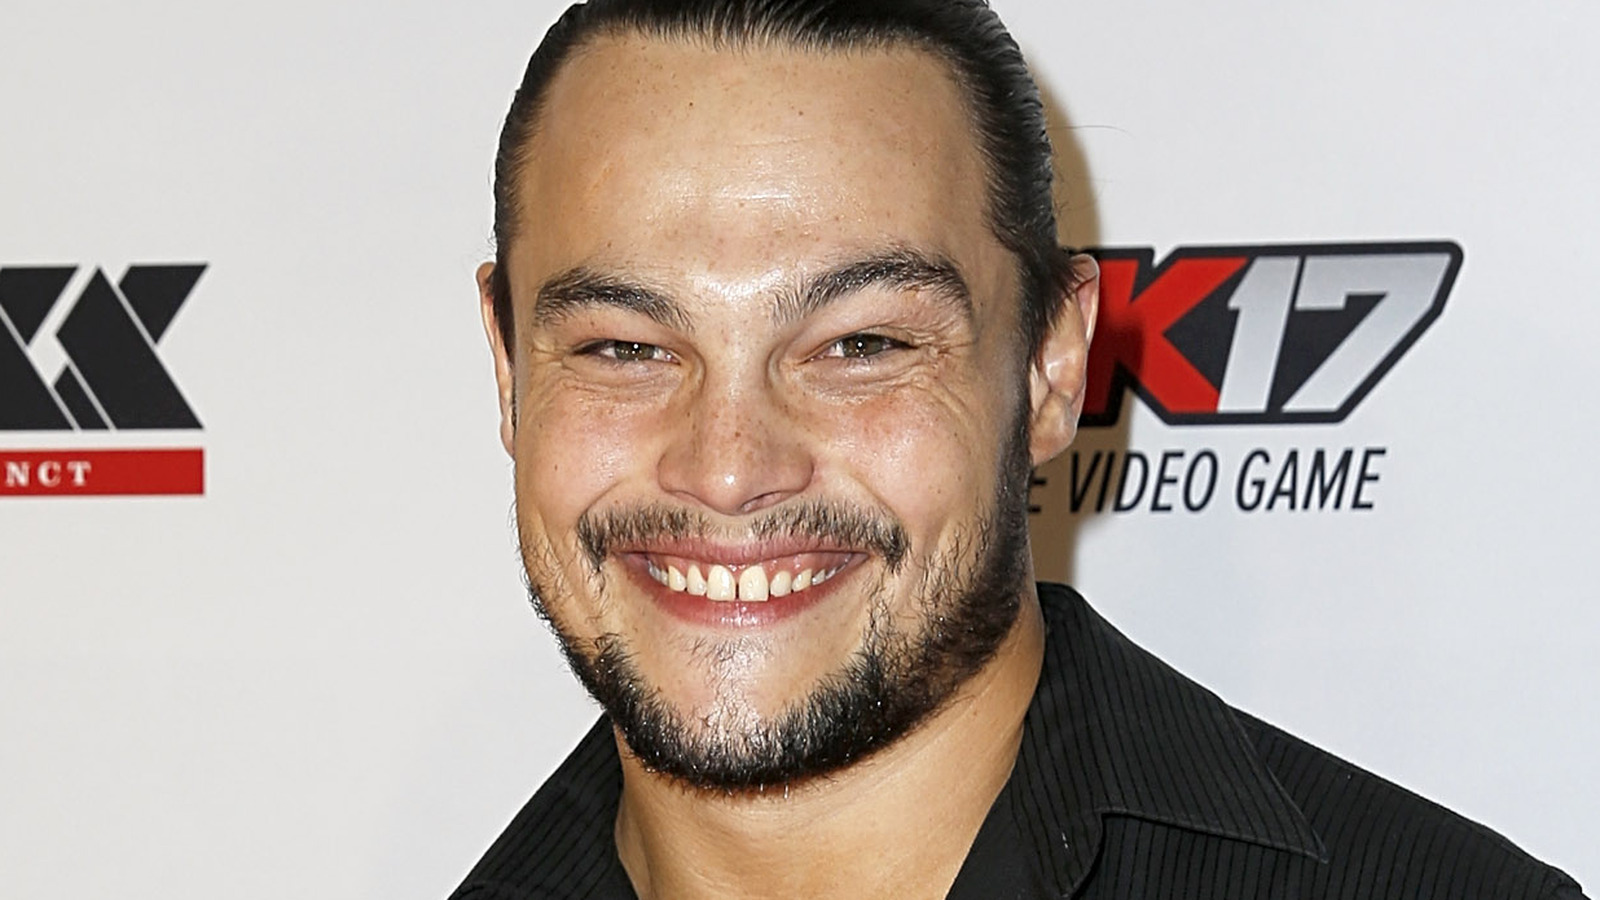 Bo Dallas Was Backstage During Recent WWE Show